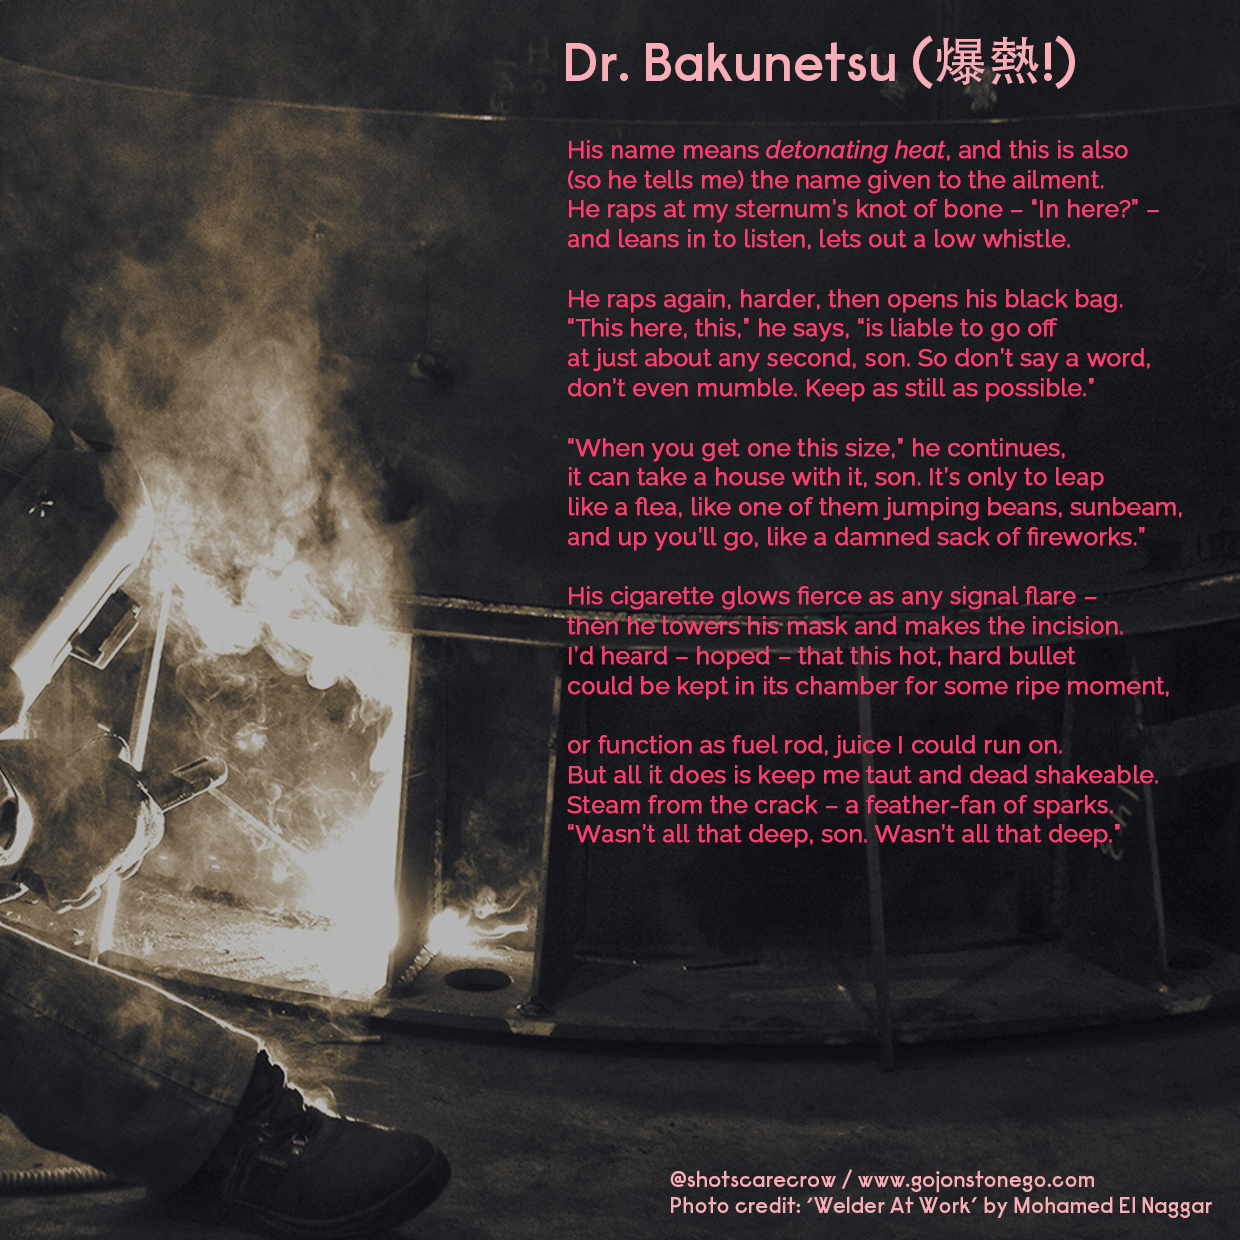 Dr. Bakunetsu (爆熱!) //

His name means detonating heat, and this is also /
(so he tells me) the name given to the ailment. /
He raps at my sternum’s knot of bone – 'In here?' – /
and leans in to listen, lets out a low whistle. / /

He raps again, harder, then opens his black bag. /
'This here, this,' he says,'is liable to go off /
at just about any second, son. So don’t say a word, /
don’t even mumble. Keep as still as possible.' //

'When you get one this size,' he continues, /
it can take a house with it, son. It's only to leap /
like a flea, like one of them jumping beans, sunbeam, /
and up you'll go, like a damned sack of fireworks.' / /

His cigarette glows fierce as any signal flare – /
then he lowers his mask and makes the incision. /
I'd heard – hoped – that this hot, hard bullet /
could be kept in its chamber for some ripe moment, / /

or function as fuel rod, juice I could run on. /
But all it does is keep me taut and dead shakeable. /
Steam from the crack – a feather-fan of sparks. /
'Wasn't all that deep, son. Wasn’t all that deep.'

   
